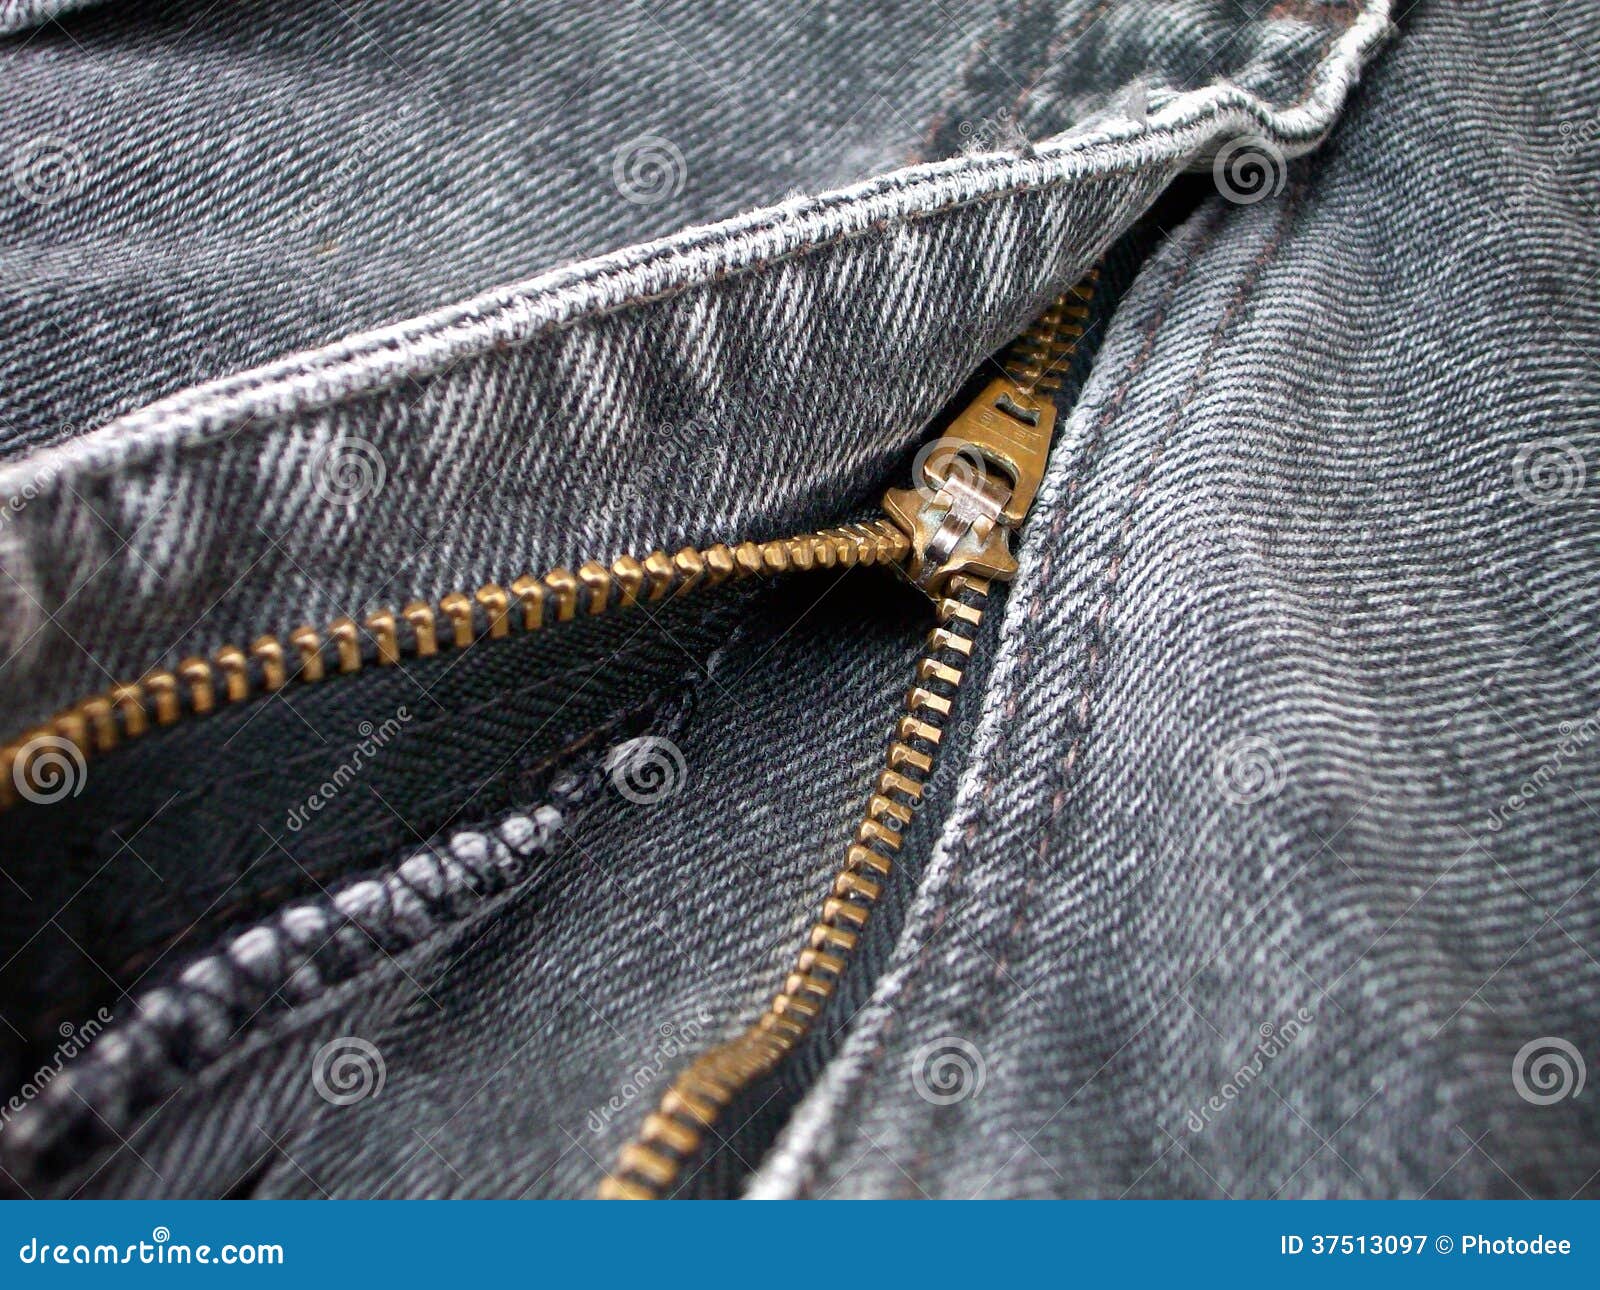 Zipper on jeans stock image. Image of fashion, cotton - 37513097